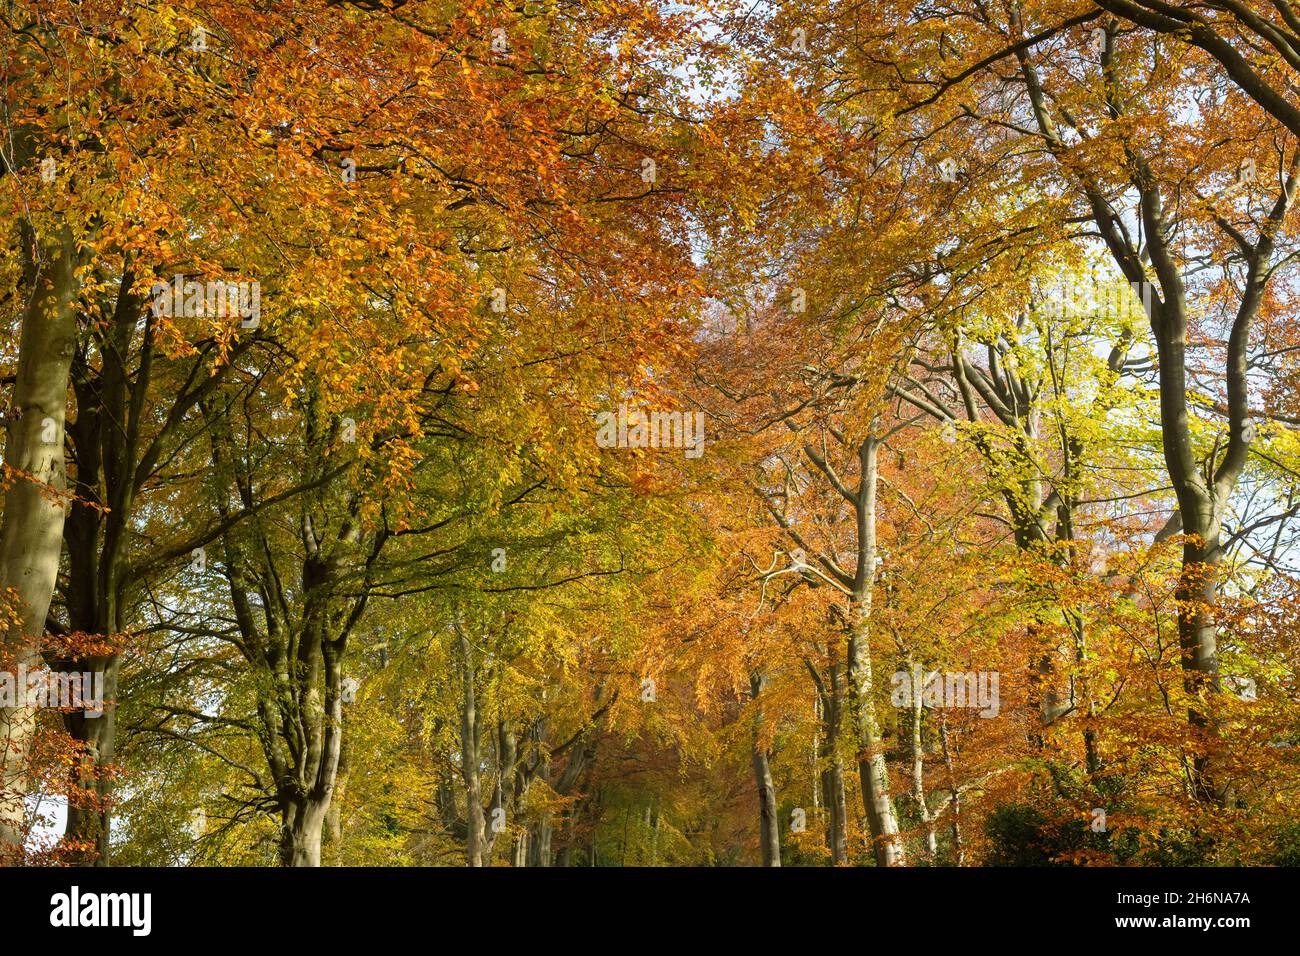 Fagus sylvatica. Autumn Beech trees along a country road. Stow on the Wold, Cotswolds, Gloucestershire, England Stock Photo